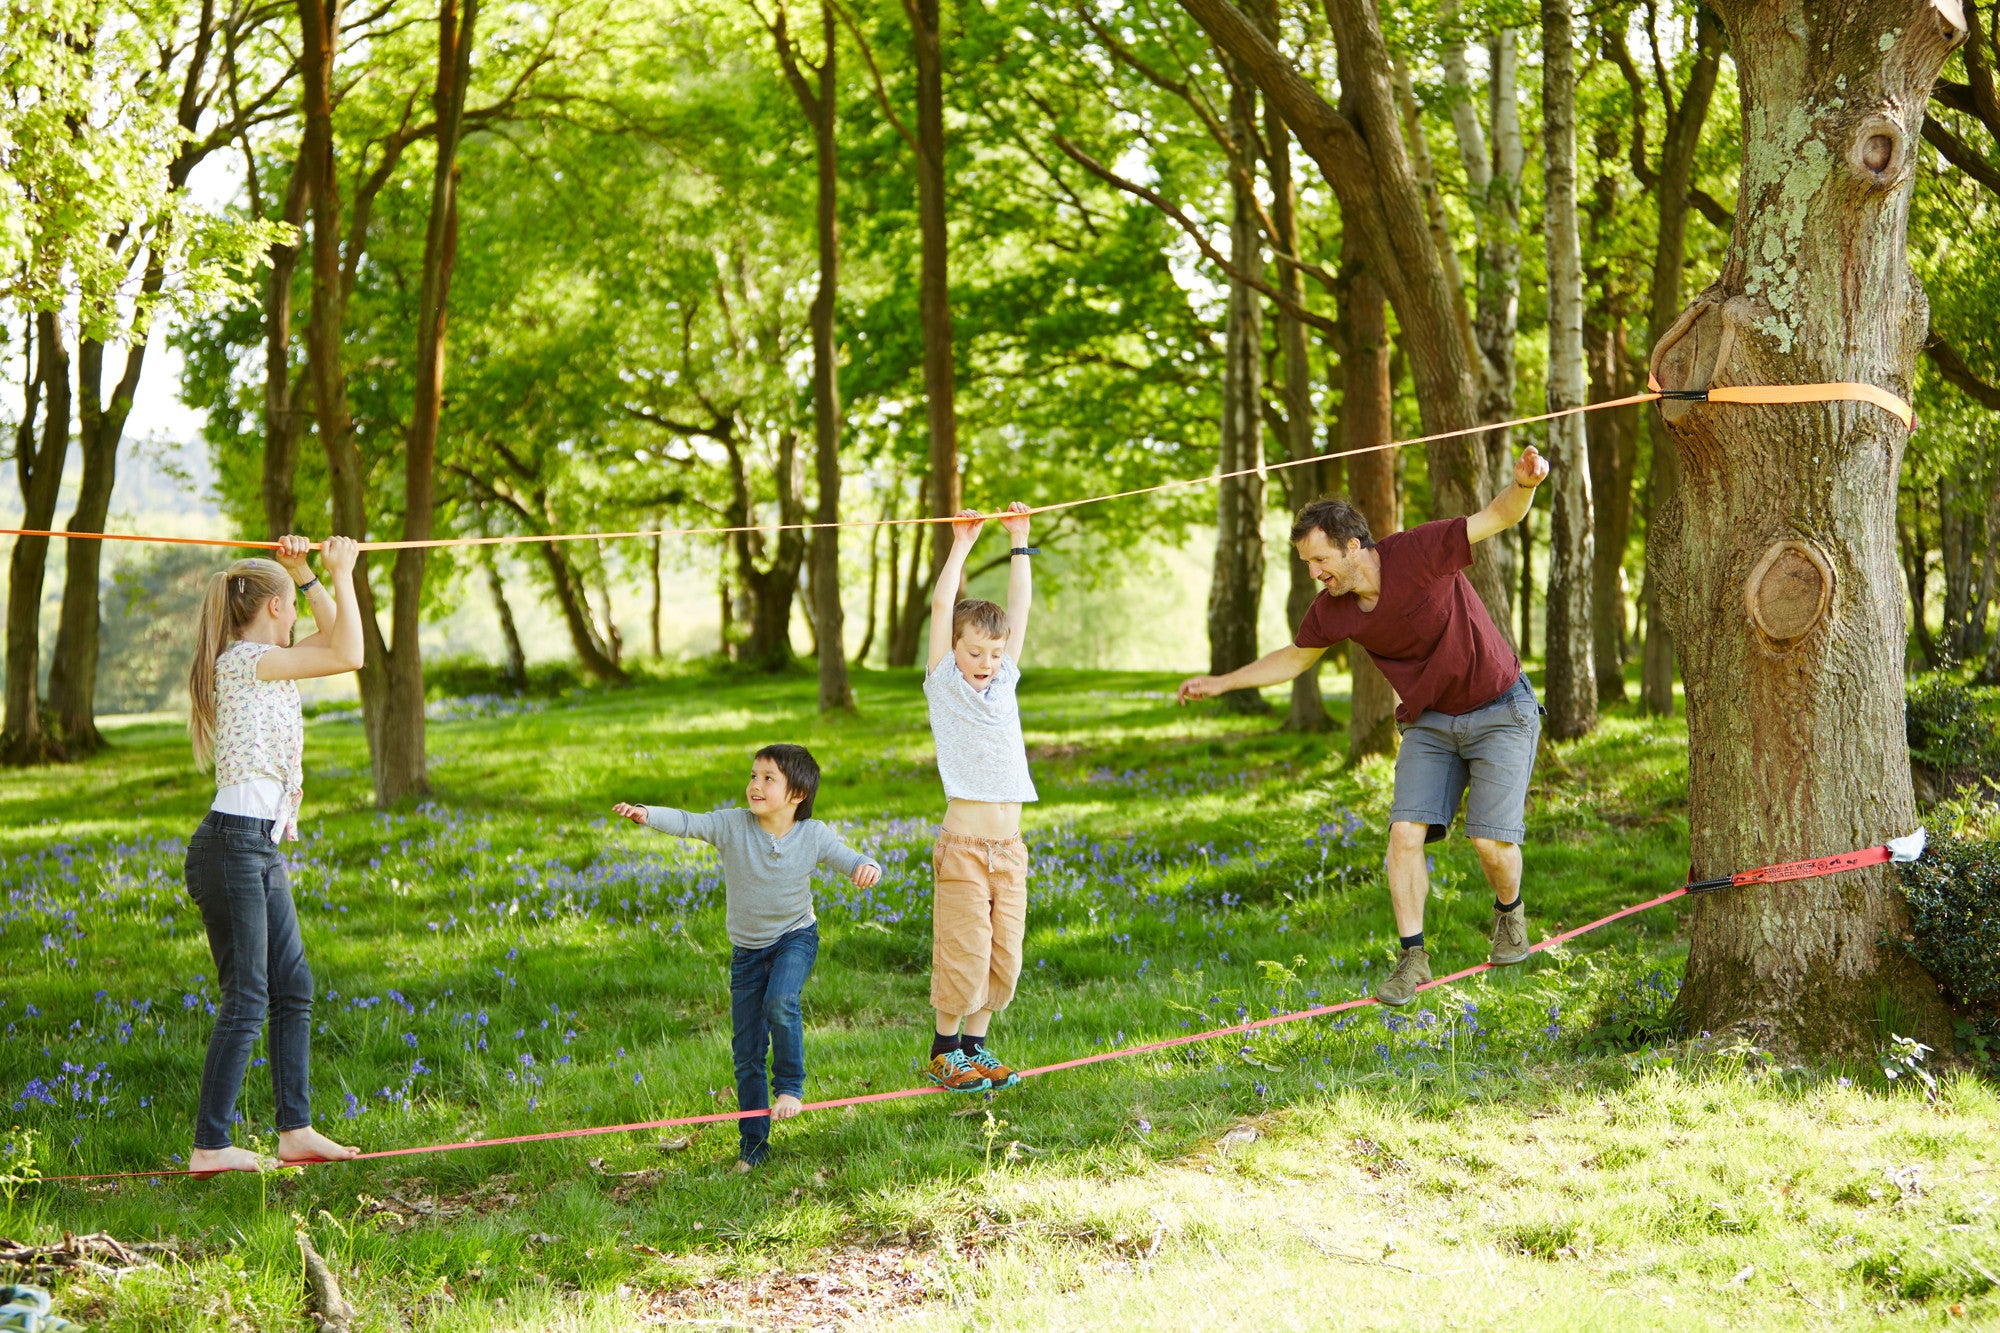 Rope for use with Slackline – Conscious Craft